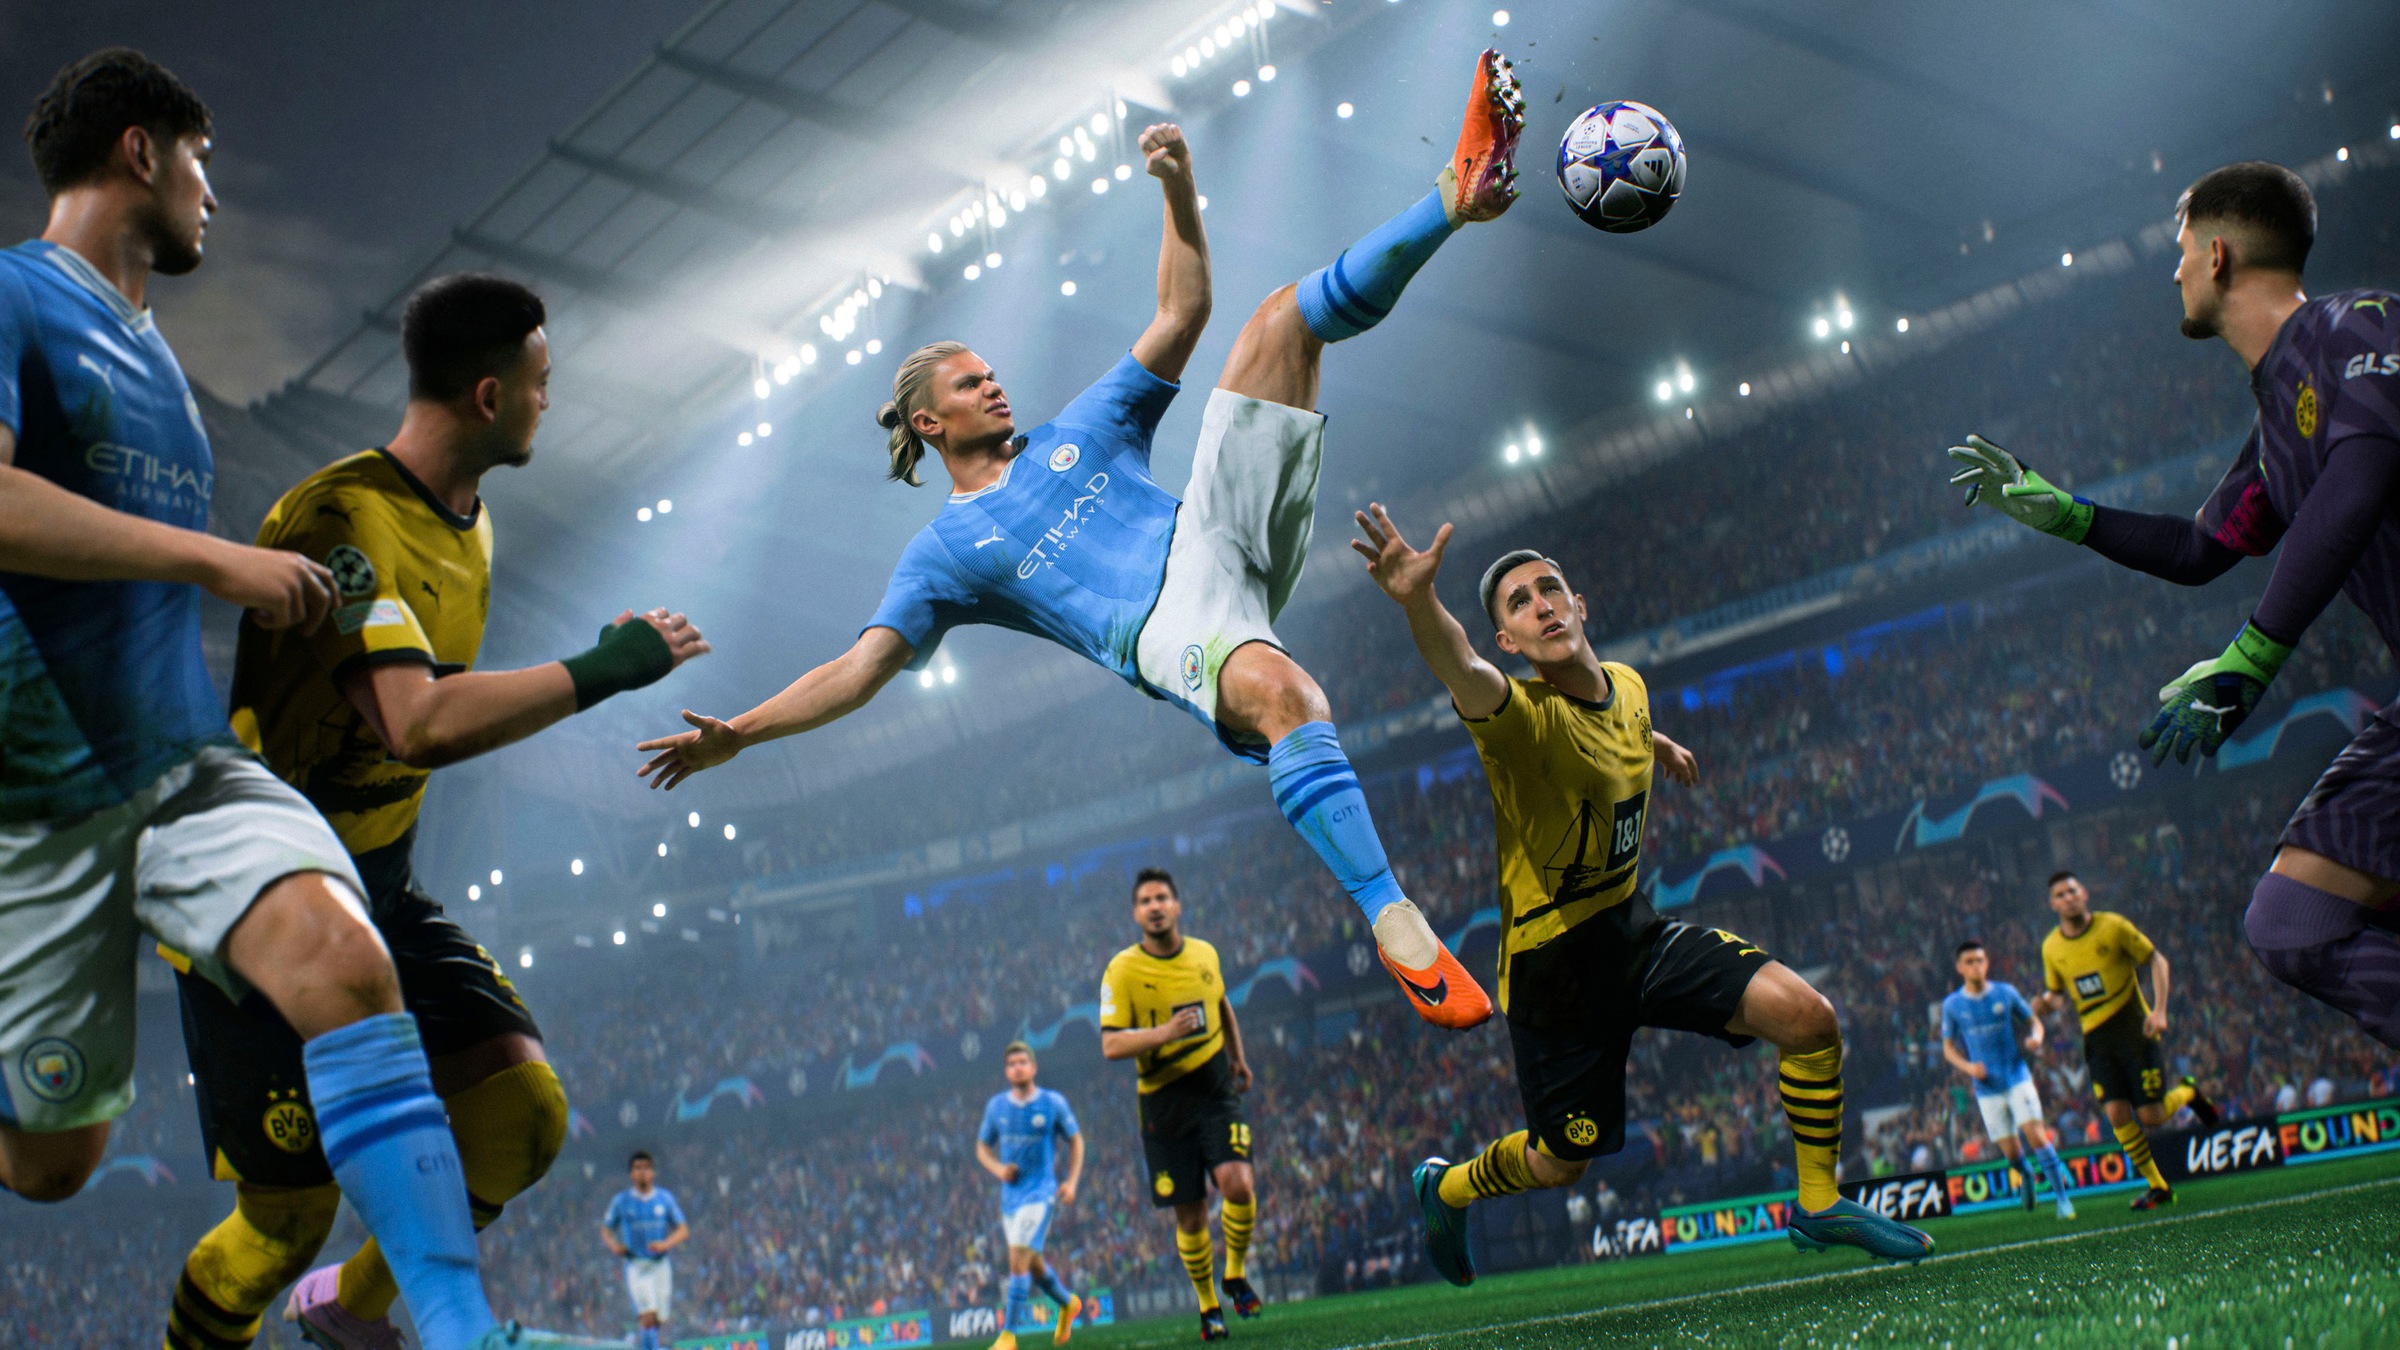 Electronic Arts Spielesoftware »EA Sports FC 24«, Xbox Series X-Xbox One